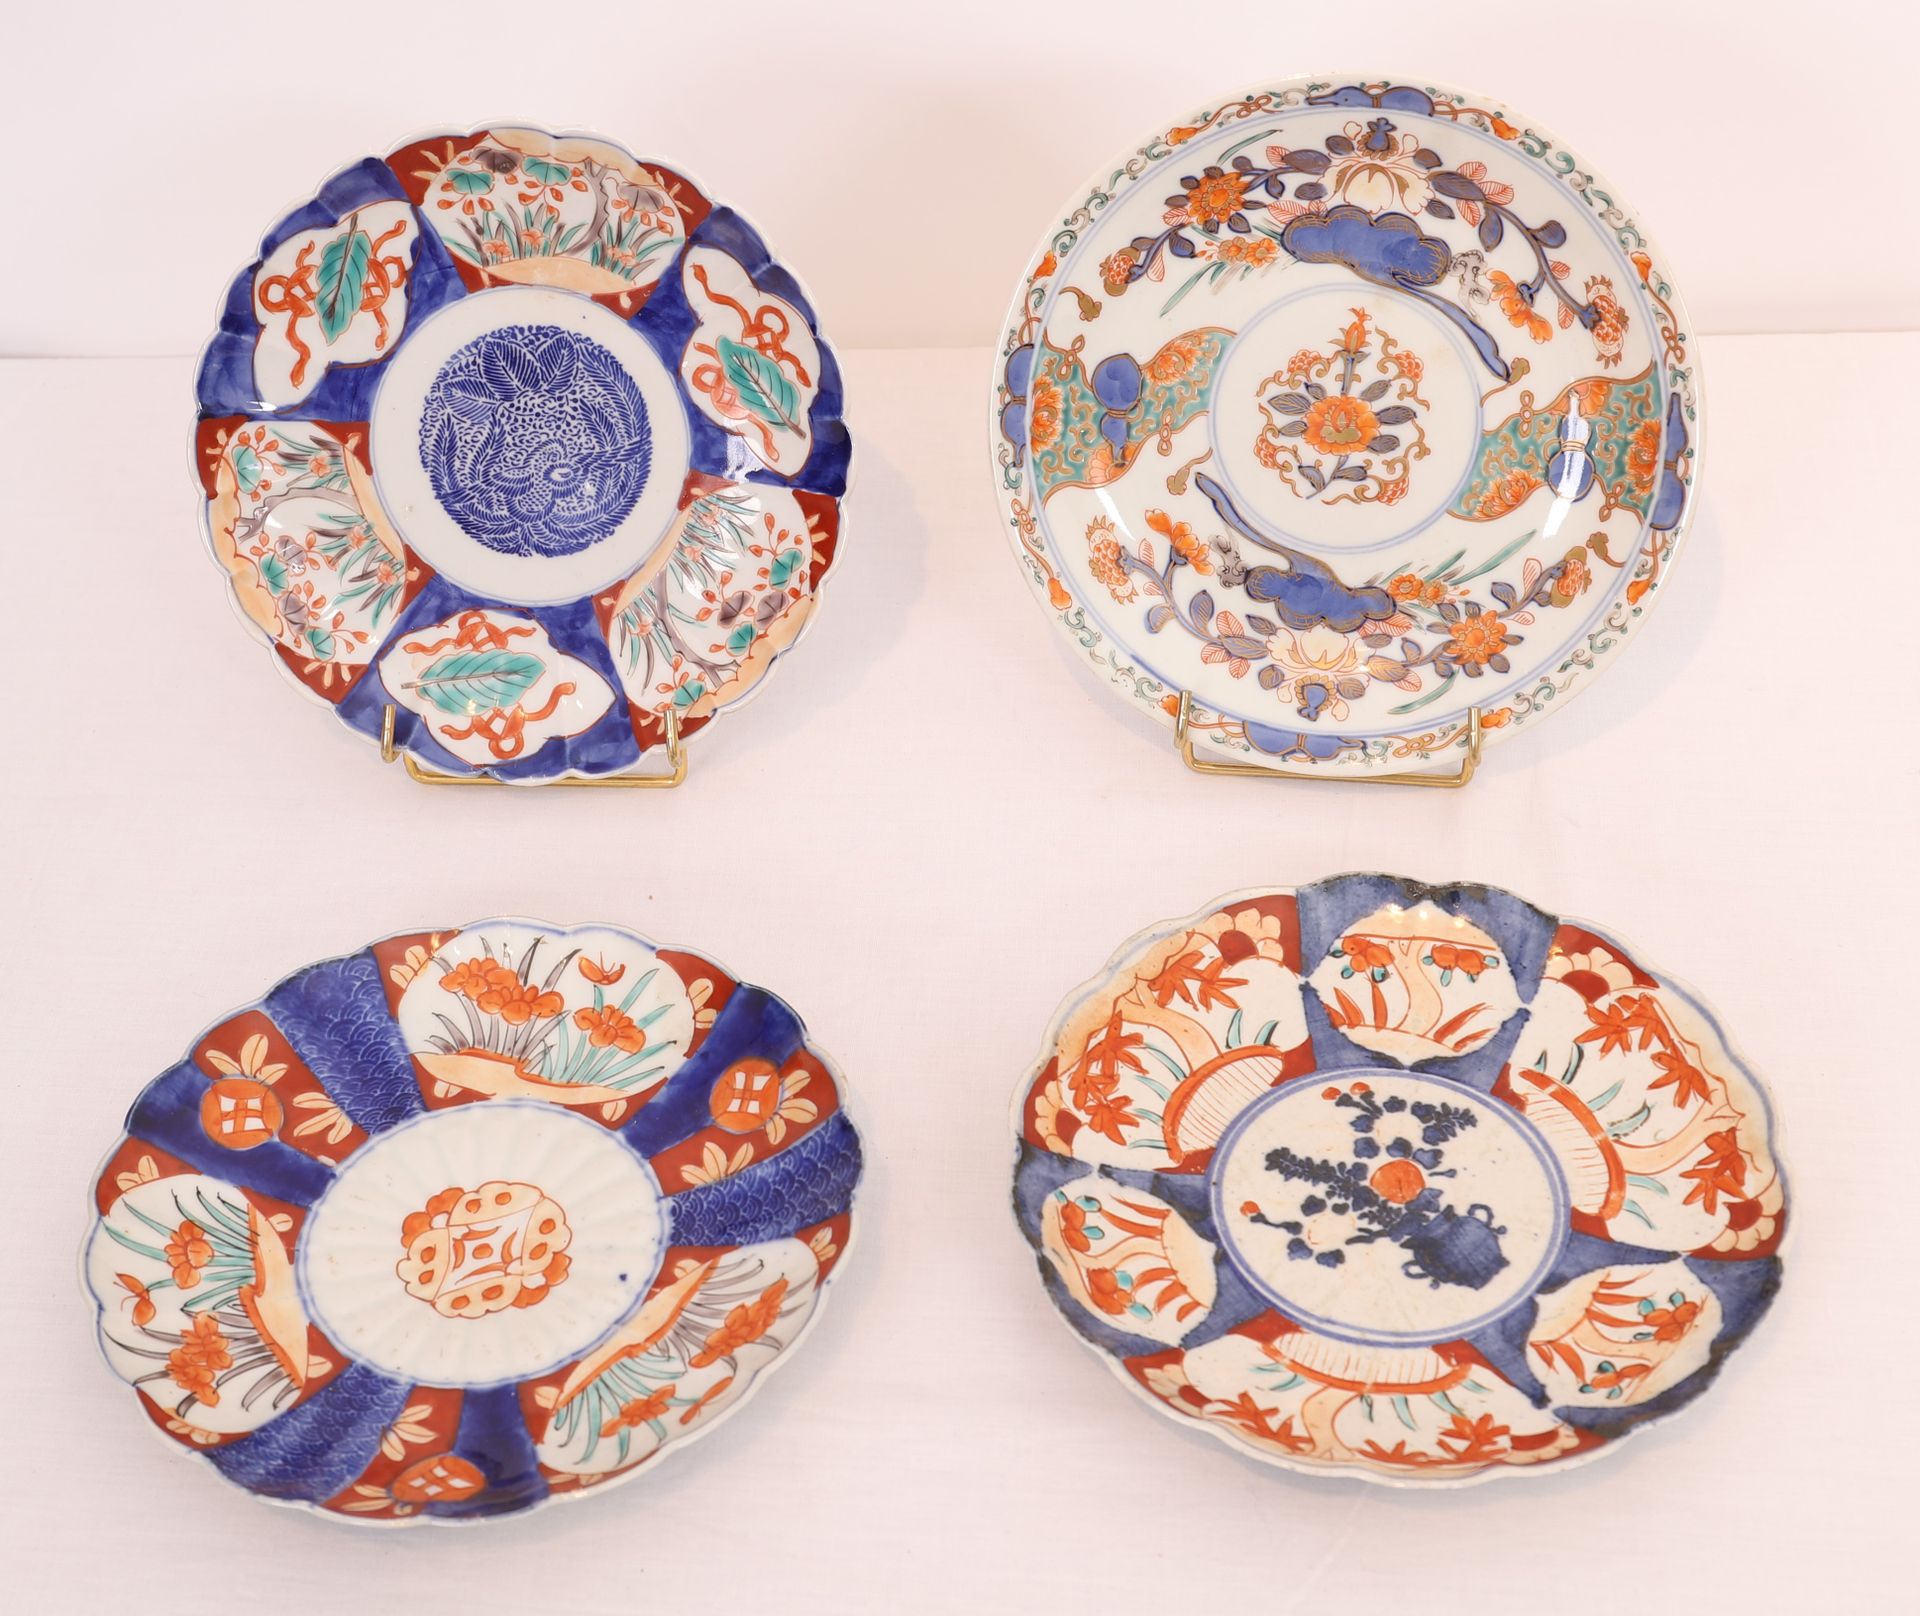 Null FOUR IMARI PORCELAIN PLATES WITH POLYCHROME DECORATION

Japan, 19th - 20th &hellip;